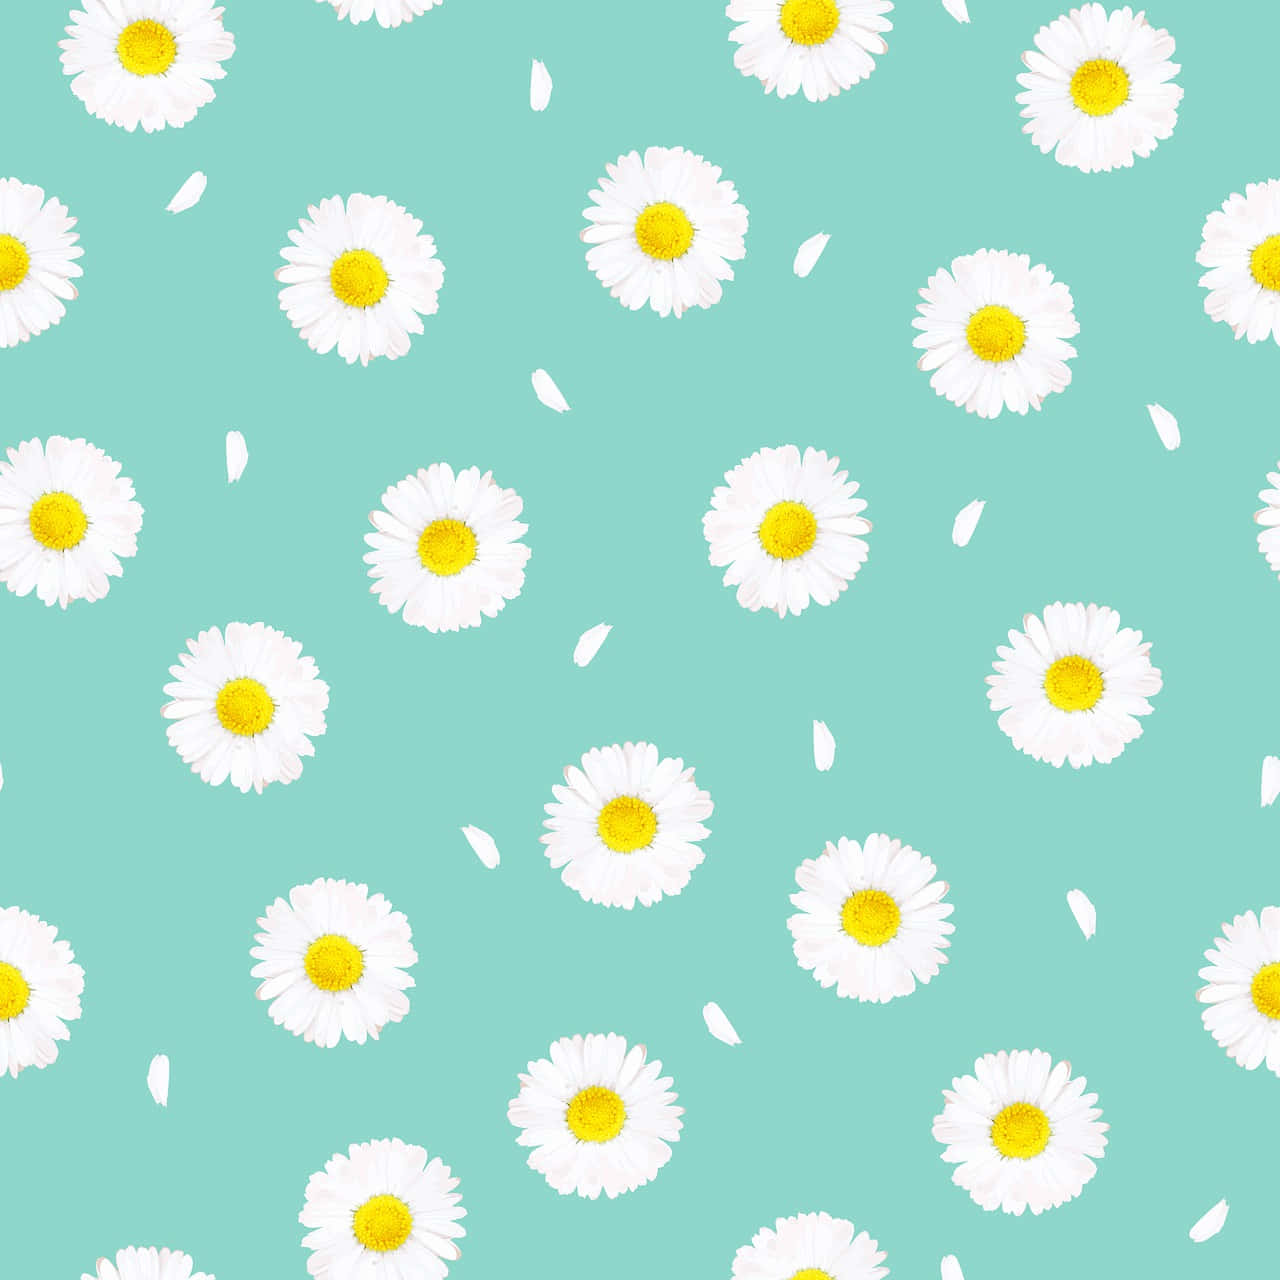 Teal Daisies Background